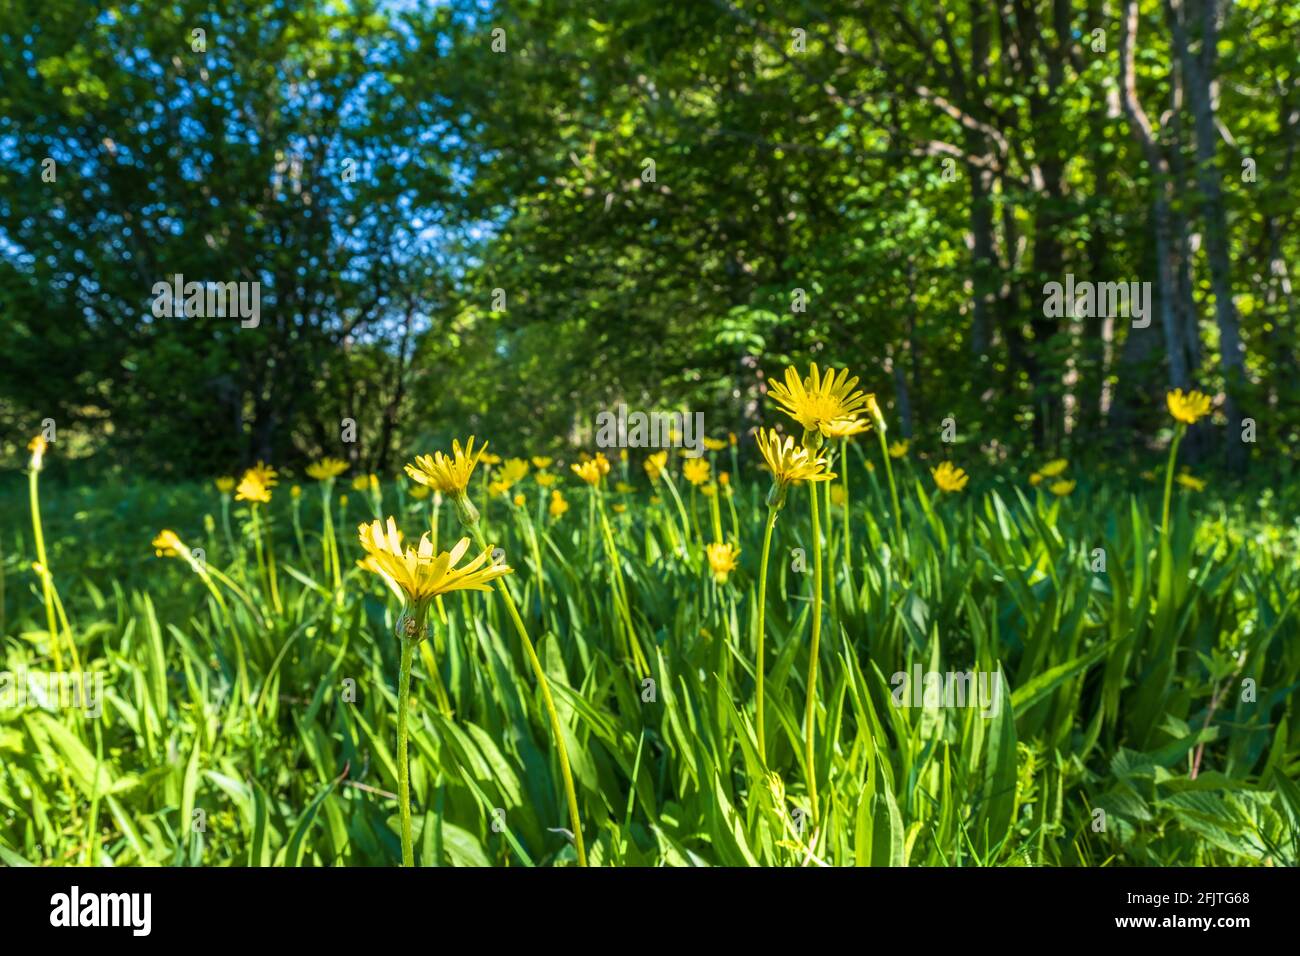 Viper's-grass flowers on a meadow at a shady forest Stock Photo